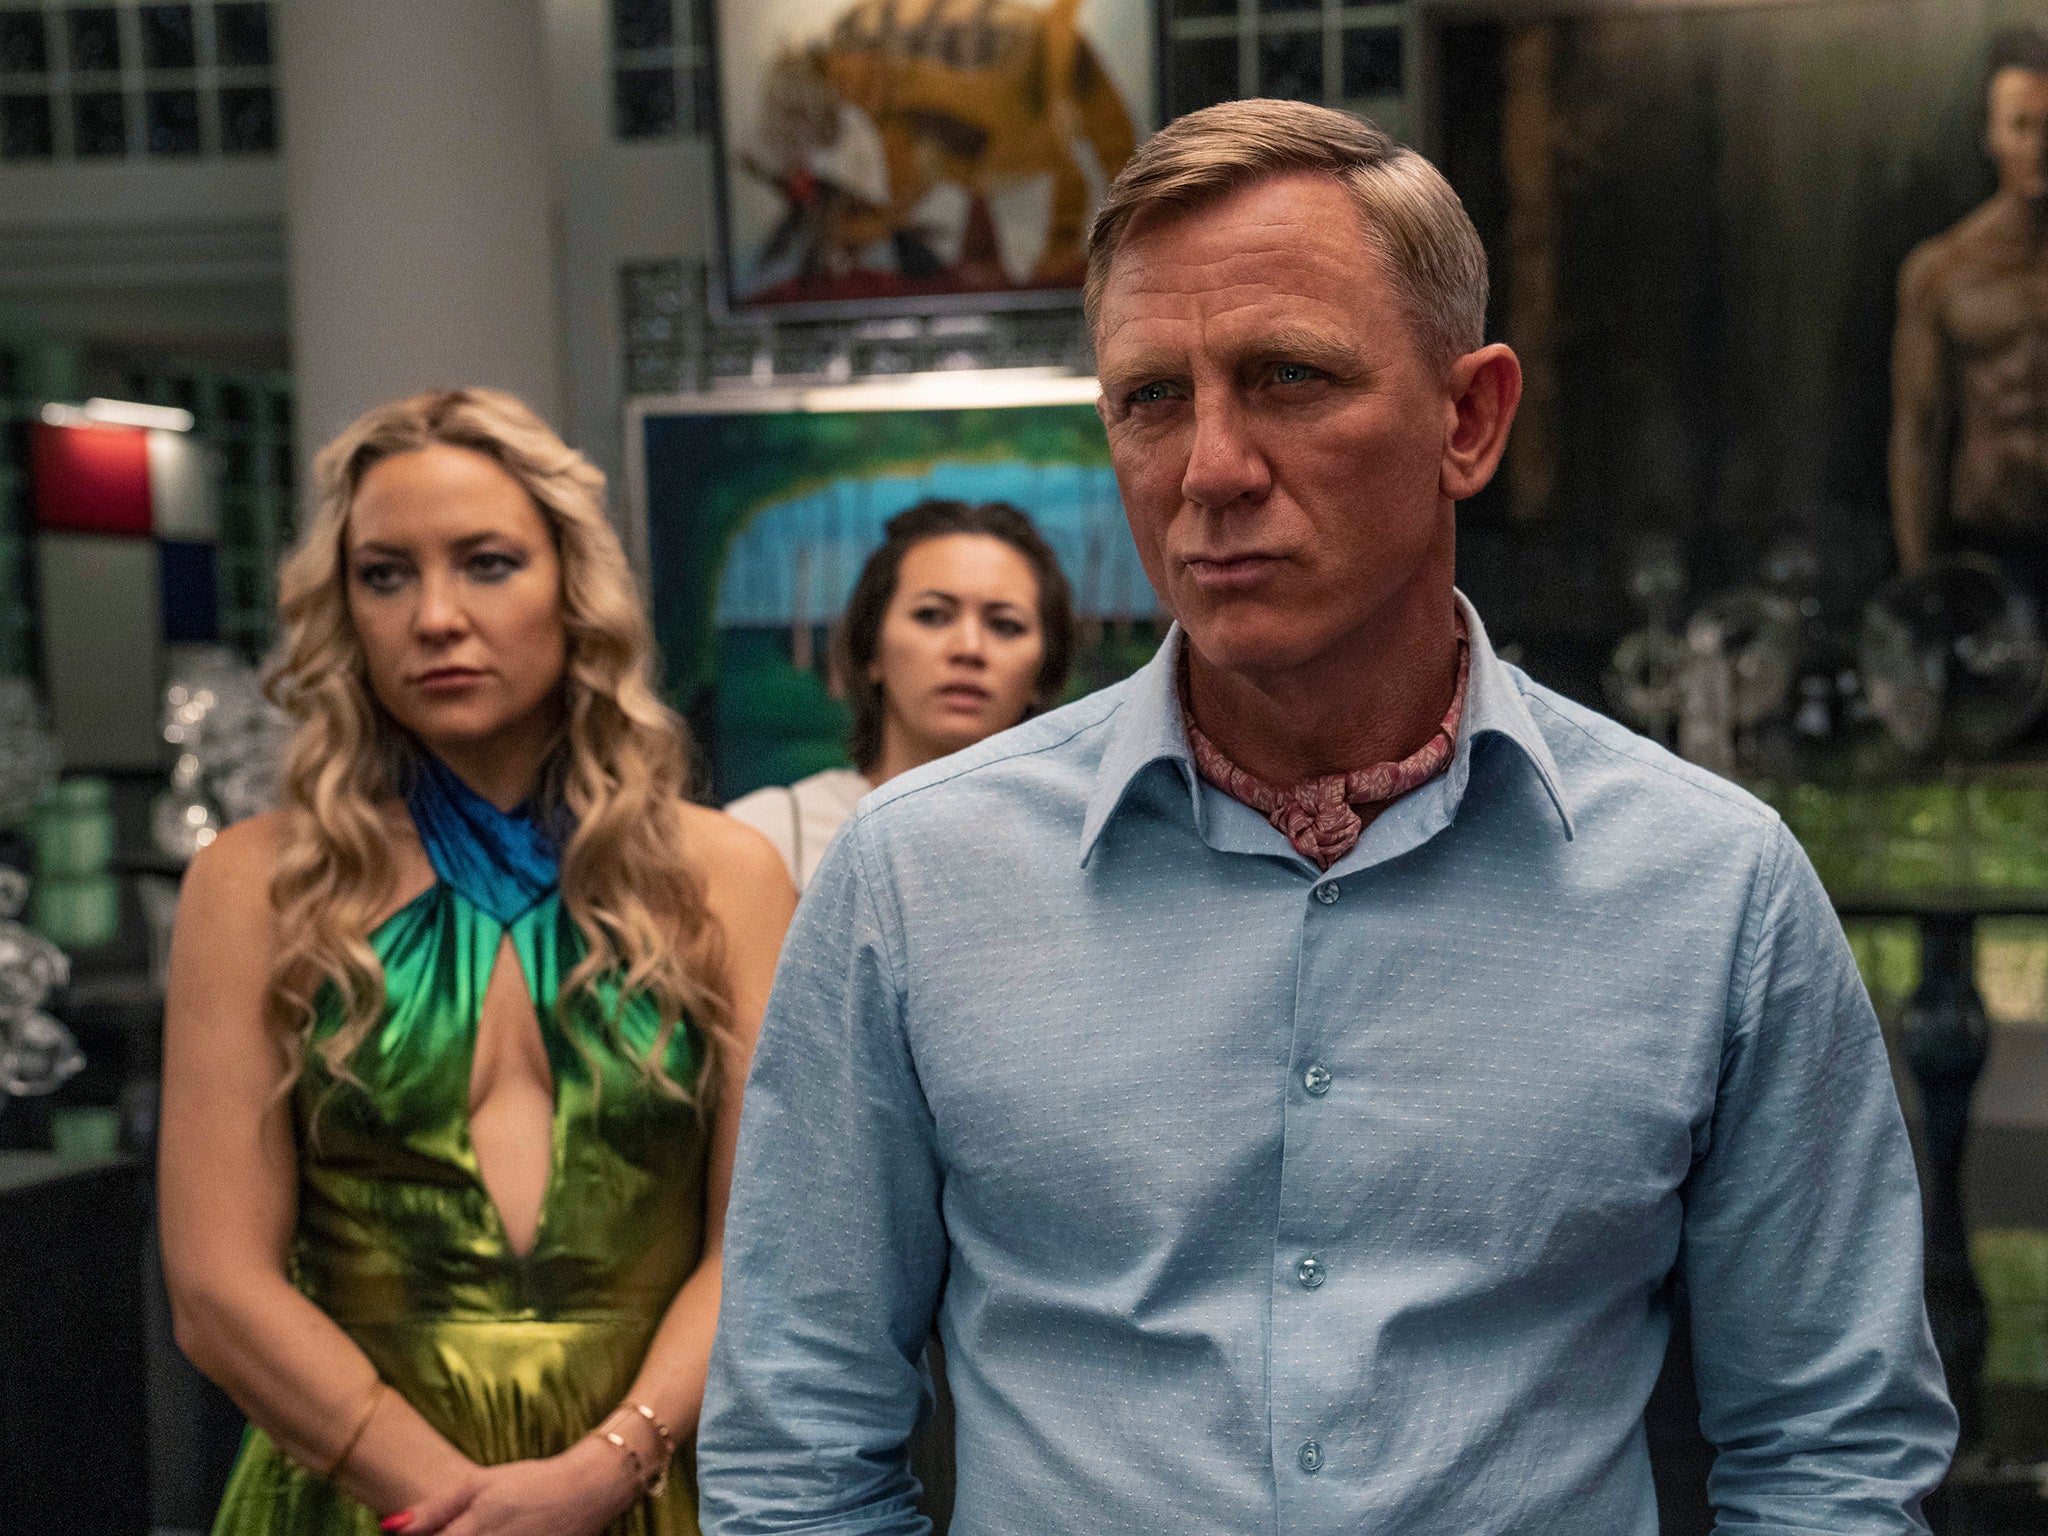 here’s layers to ‘Glass Onion: A Knives Out Mystery’, starring Daniel Craig